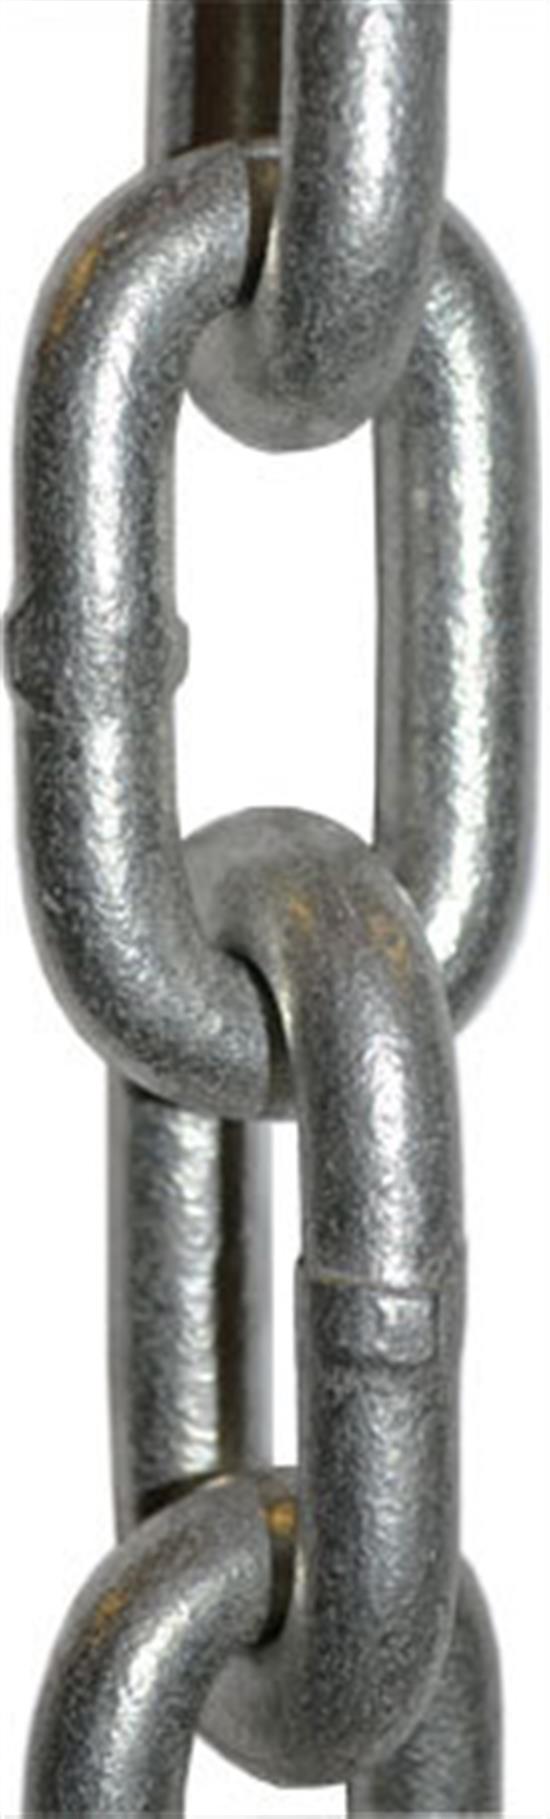 Picture of 3/8" X 20' G30 CHAIN HDG